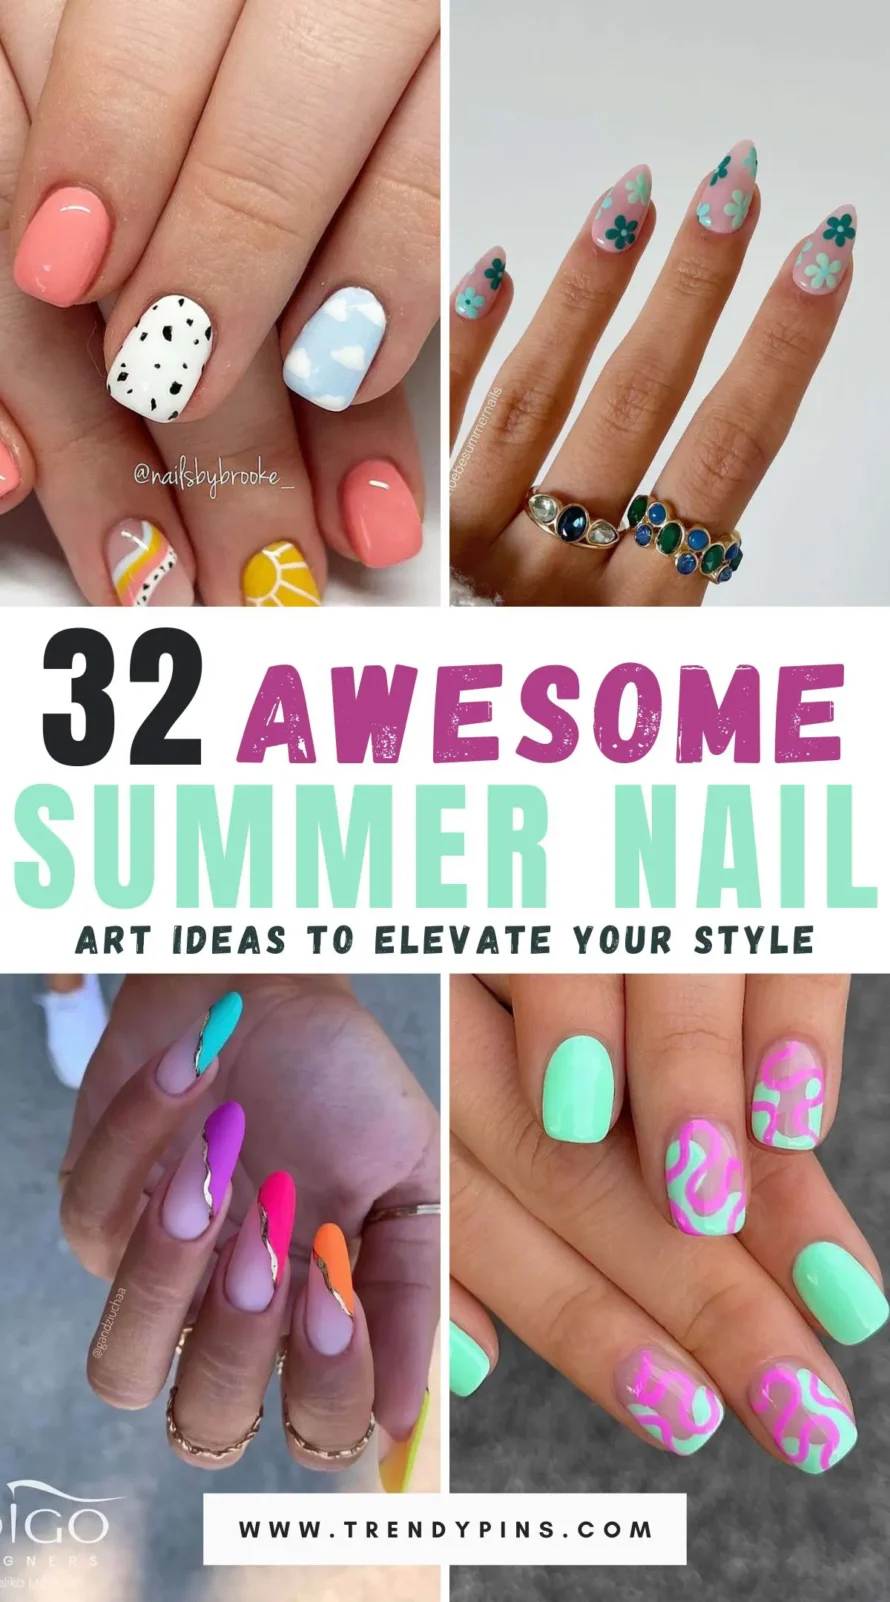 Discover 32 stunning summer nail art ideas that will elevate your style with vibrant colors, chic patterns, and trendy designs perfect for sunny days!